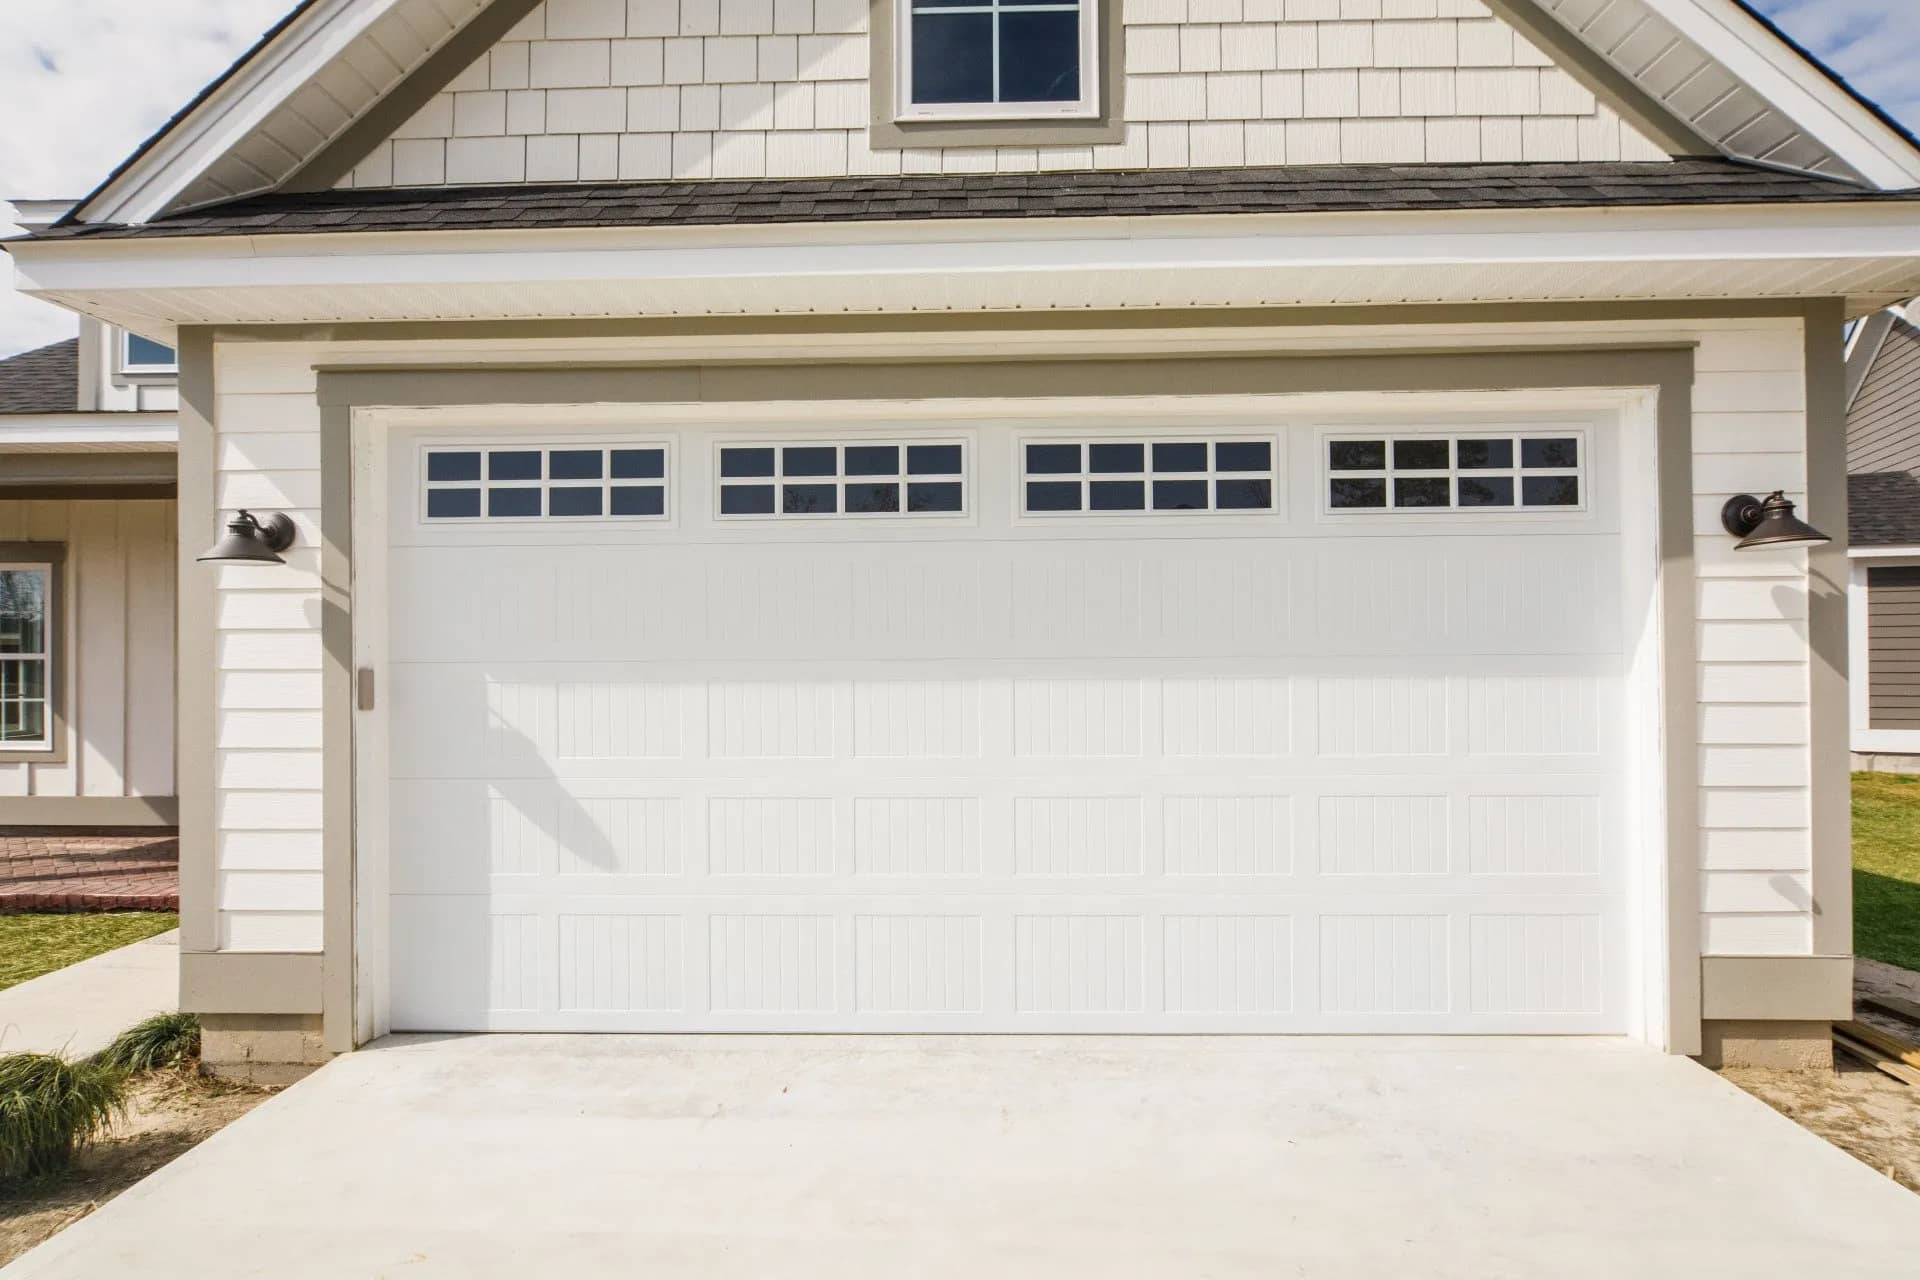 When Is It Time for a New Garage Door?